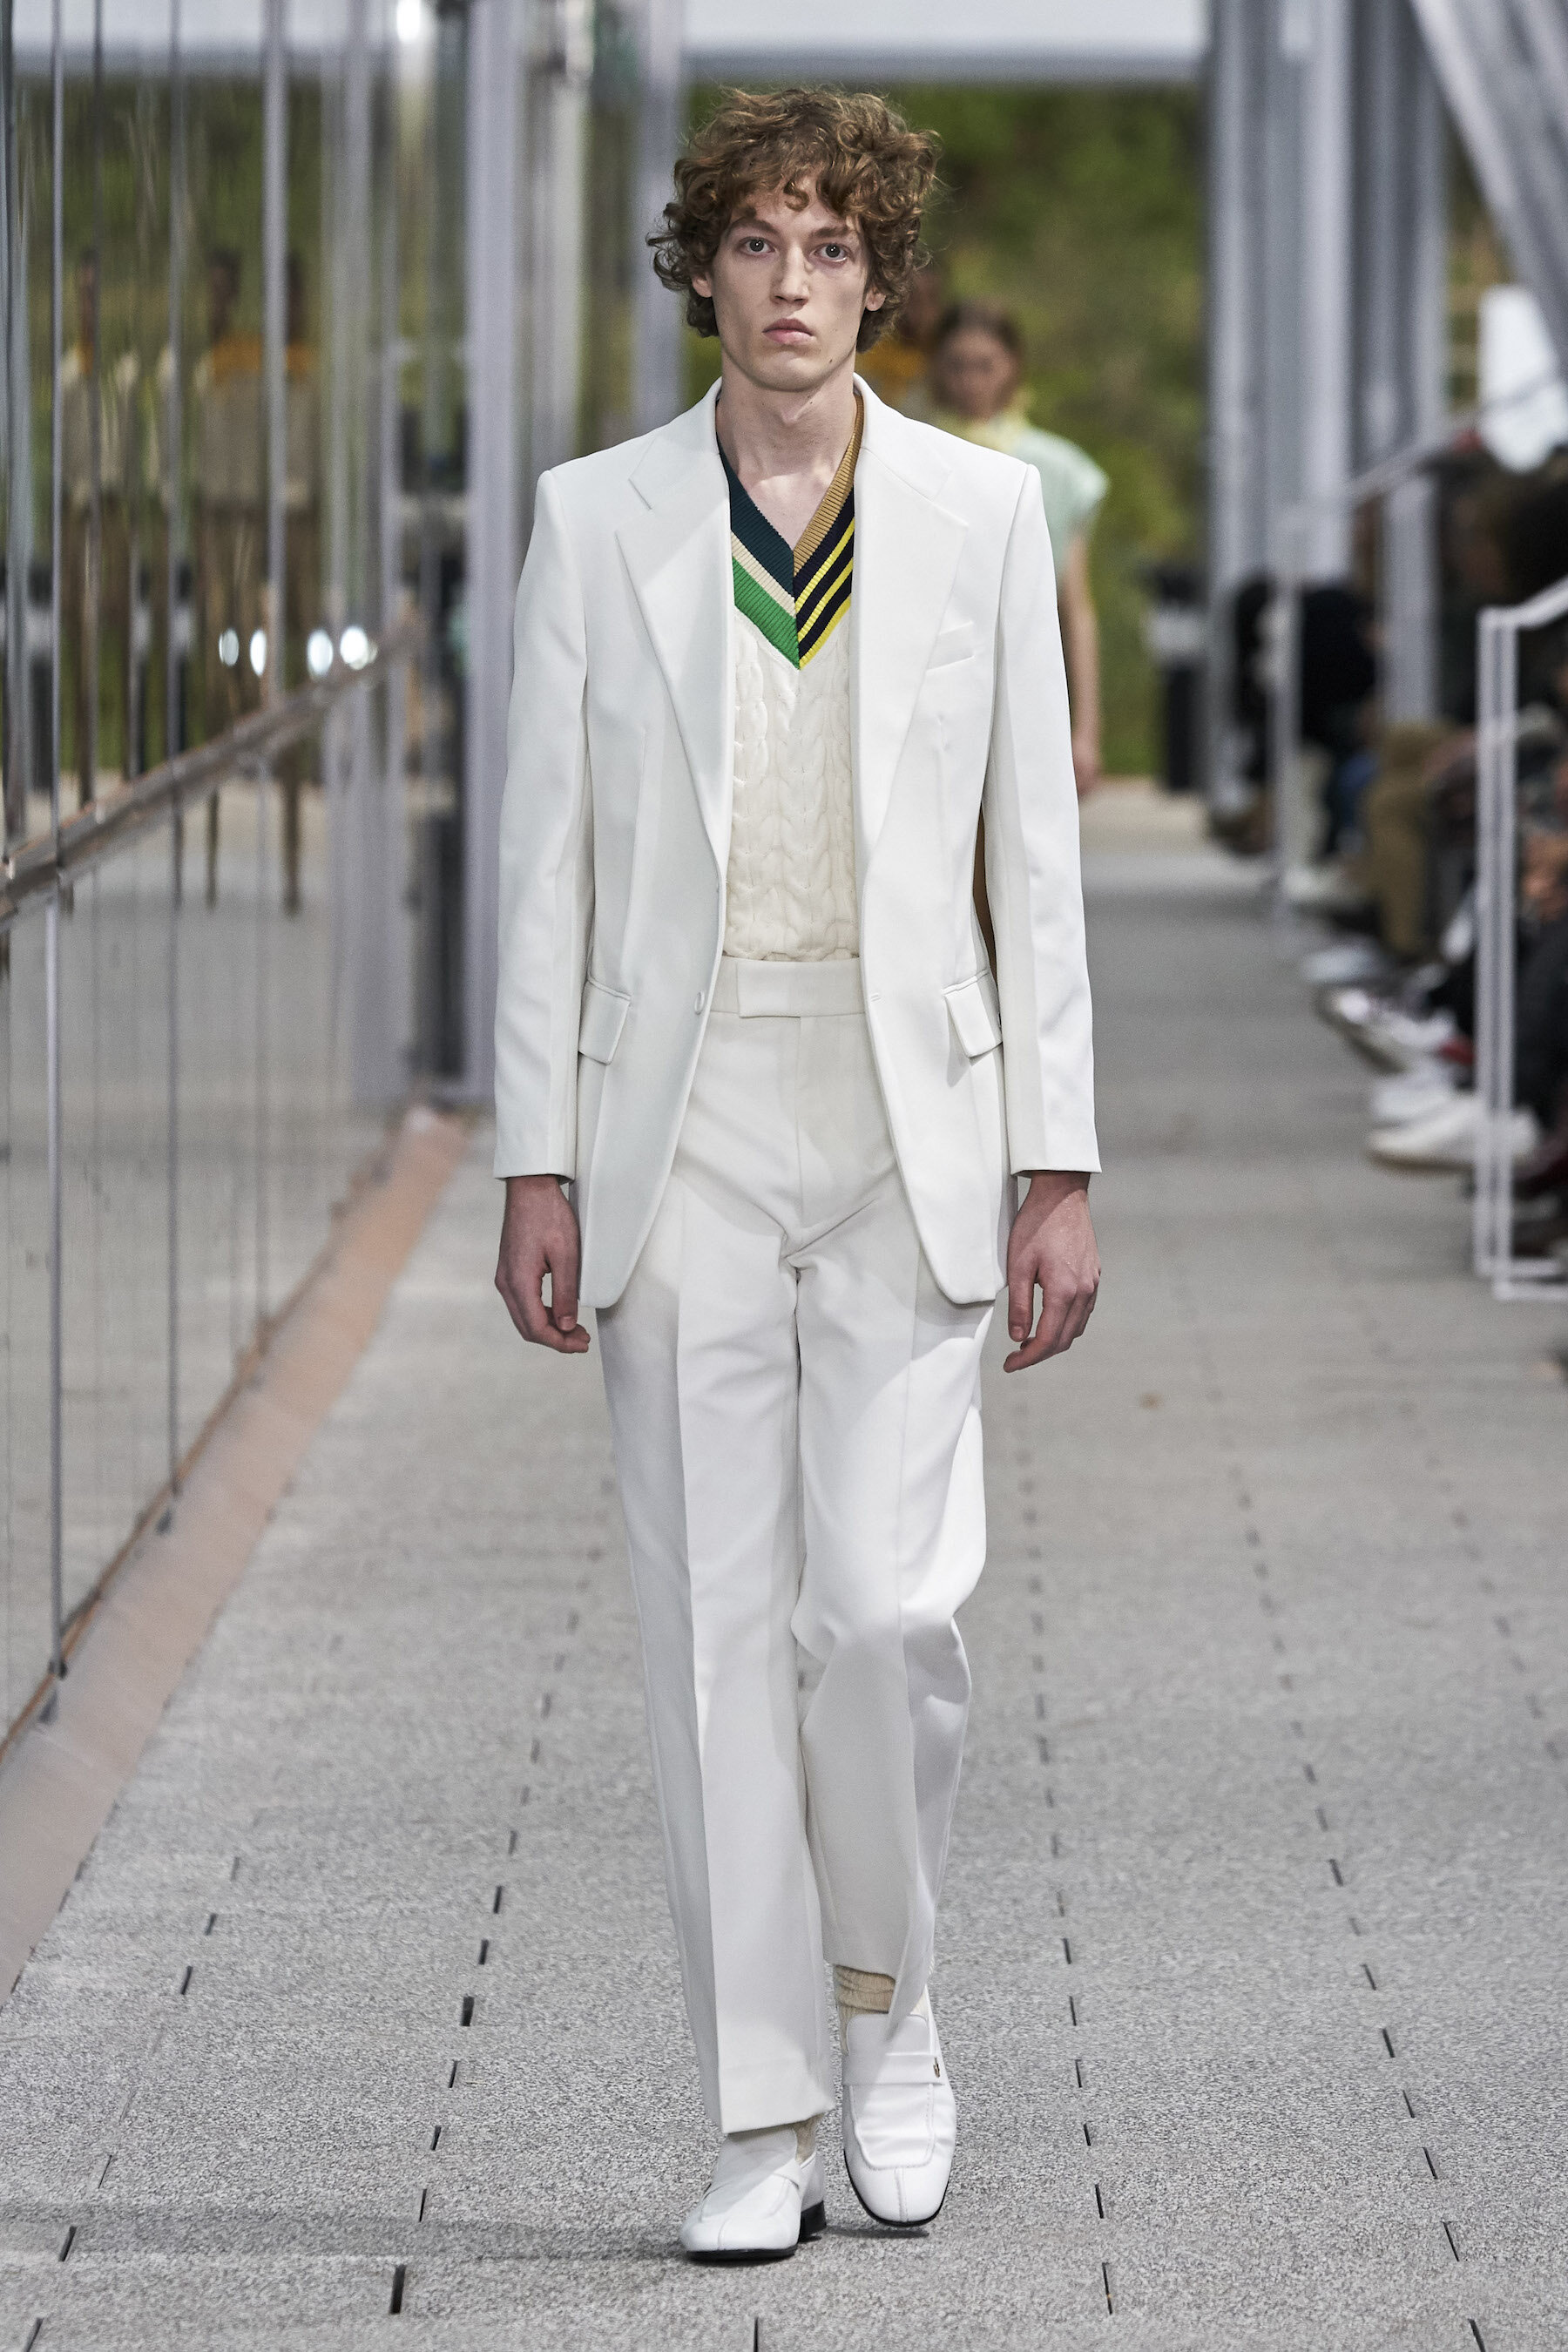 Lacoste SS20_LOOK 41 by Alessandro Lucioni  Imaxtree.com.jpg